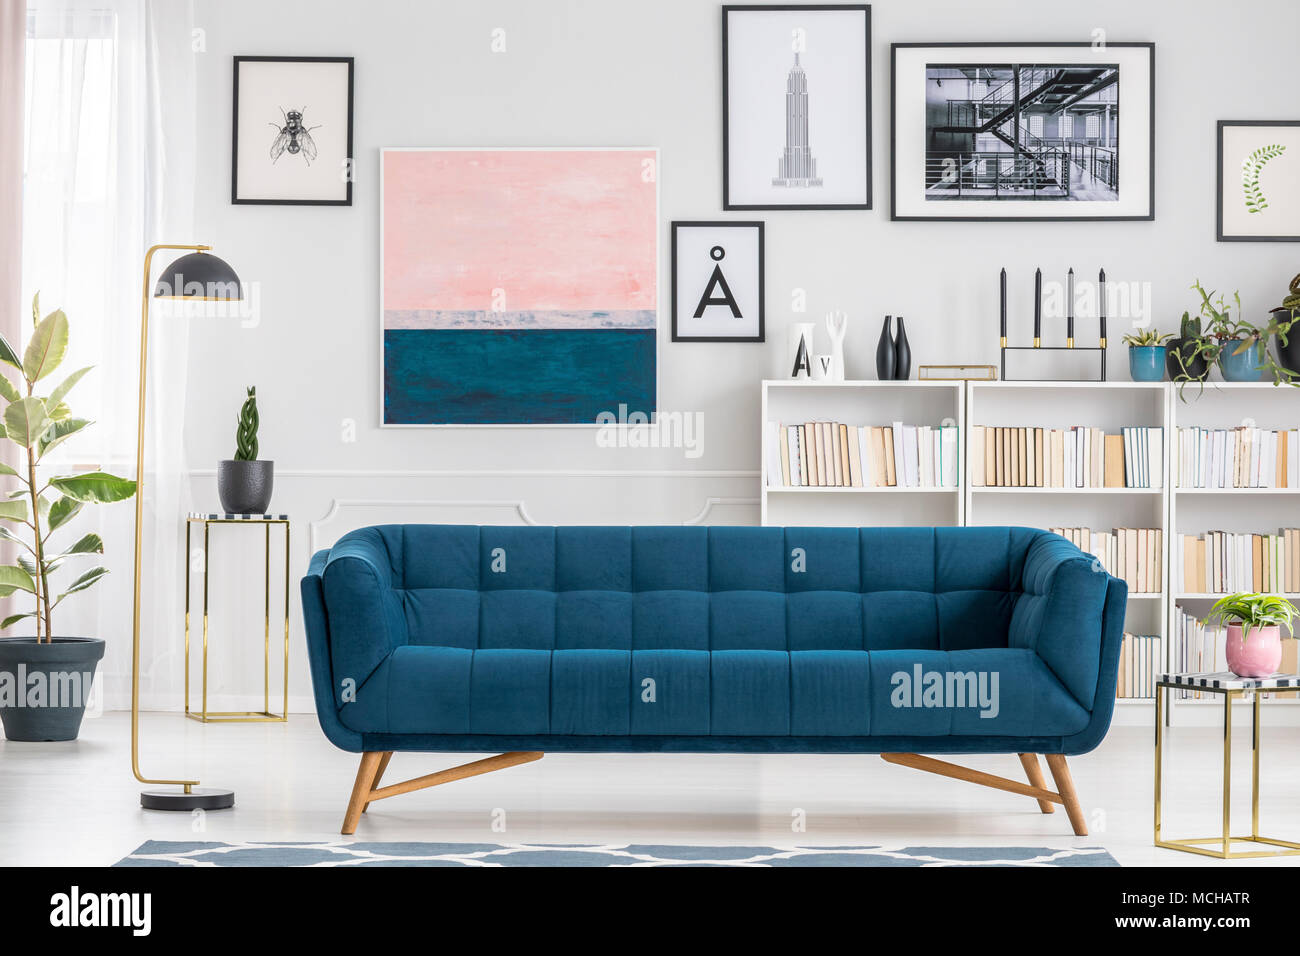 Comfy, blue couch set in white living room interior with bookshelf and paintings Stock Photo